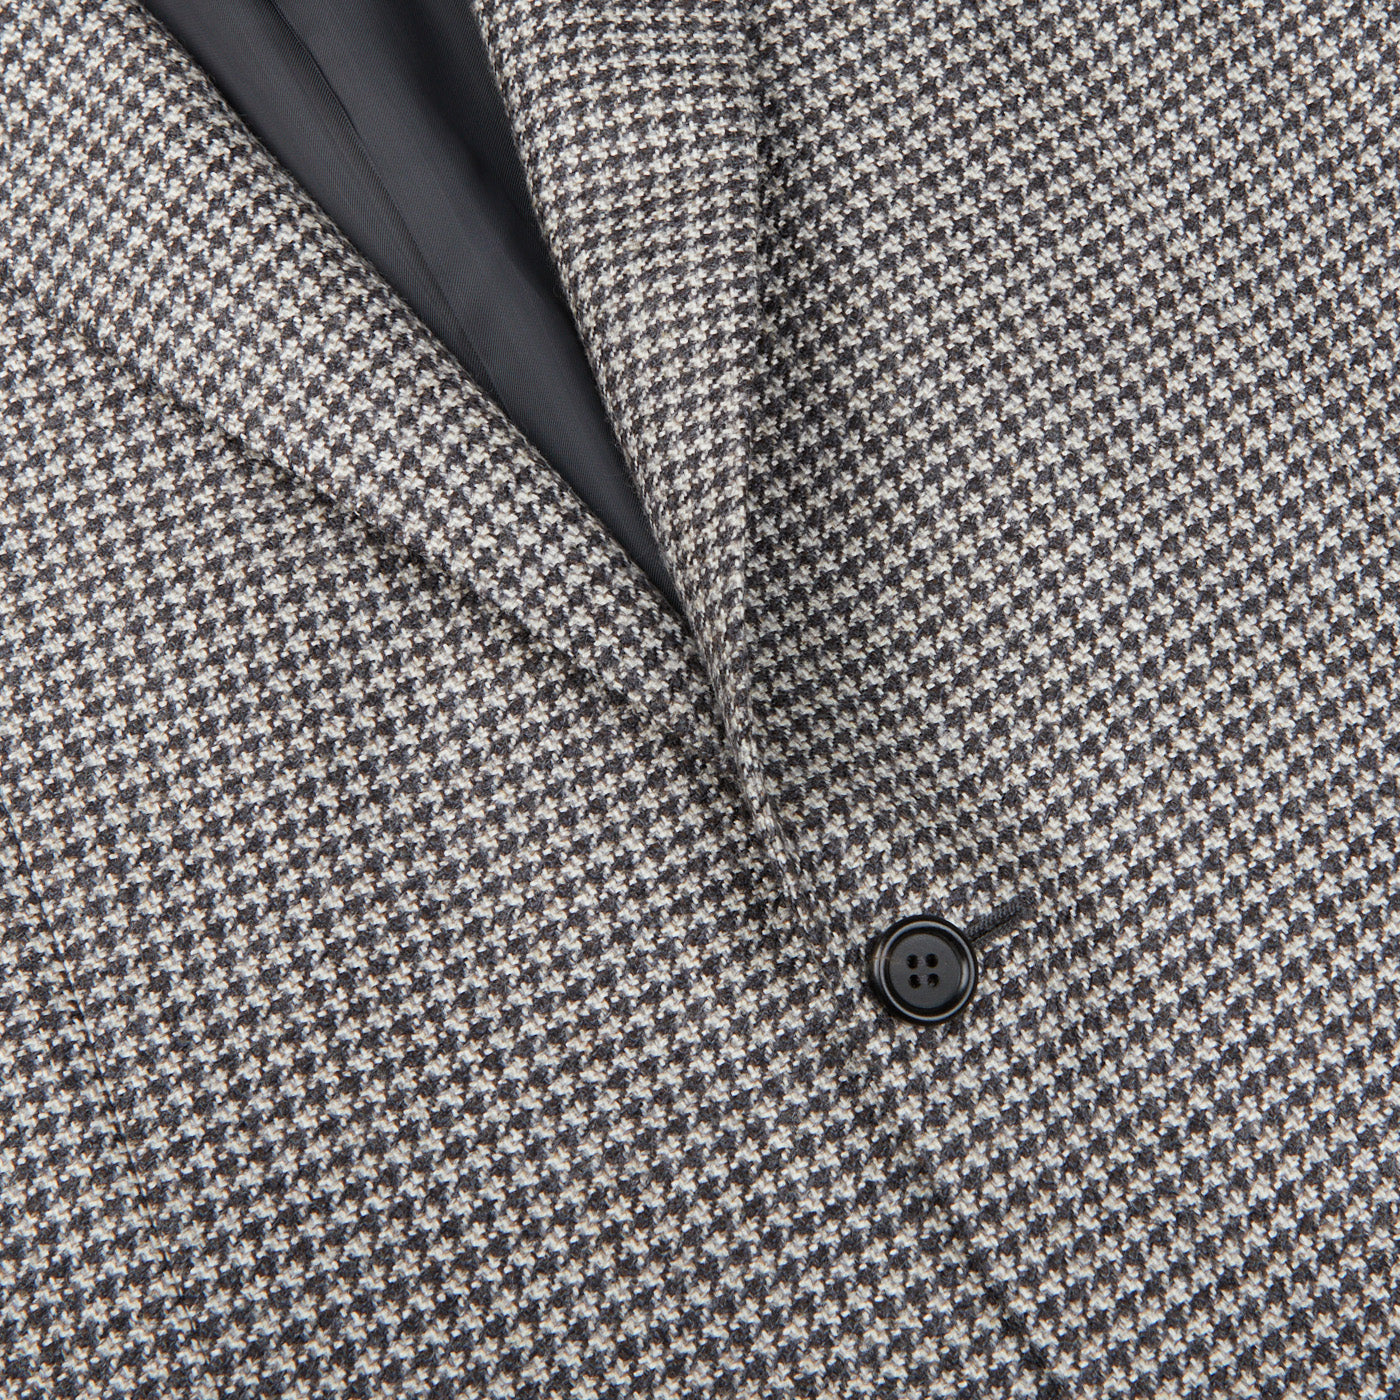 A close up of a Canali Grey Houndstooth Wool Drop 6 Blazer.